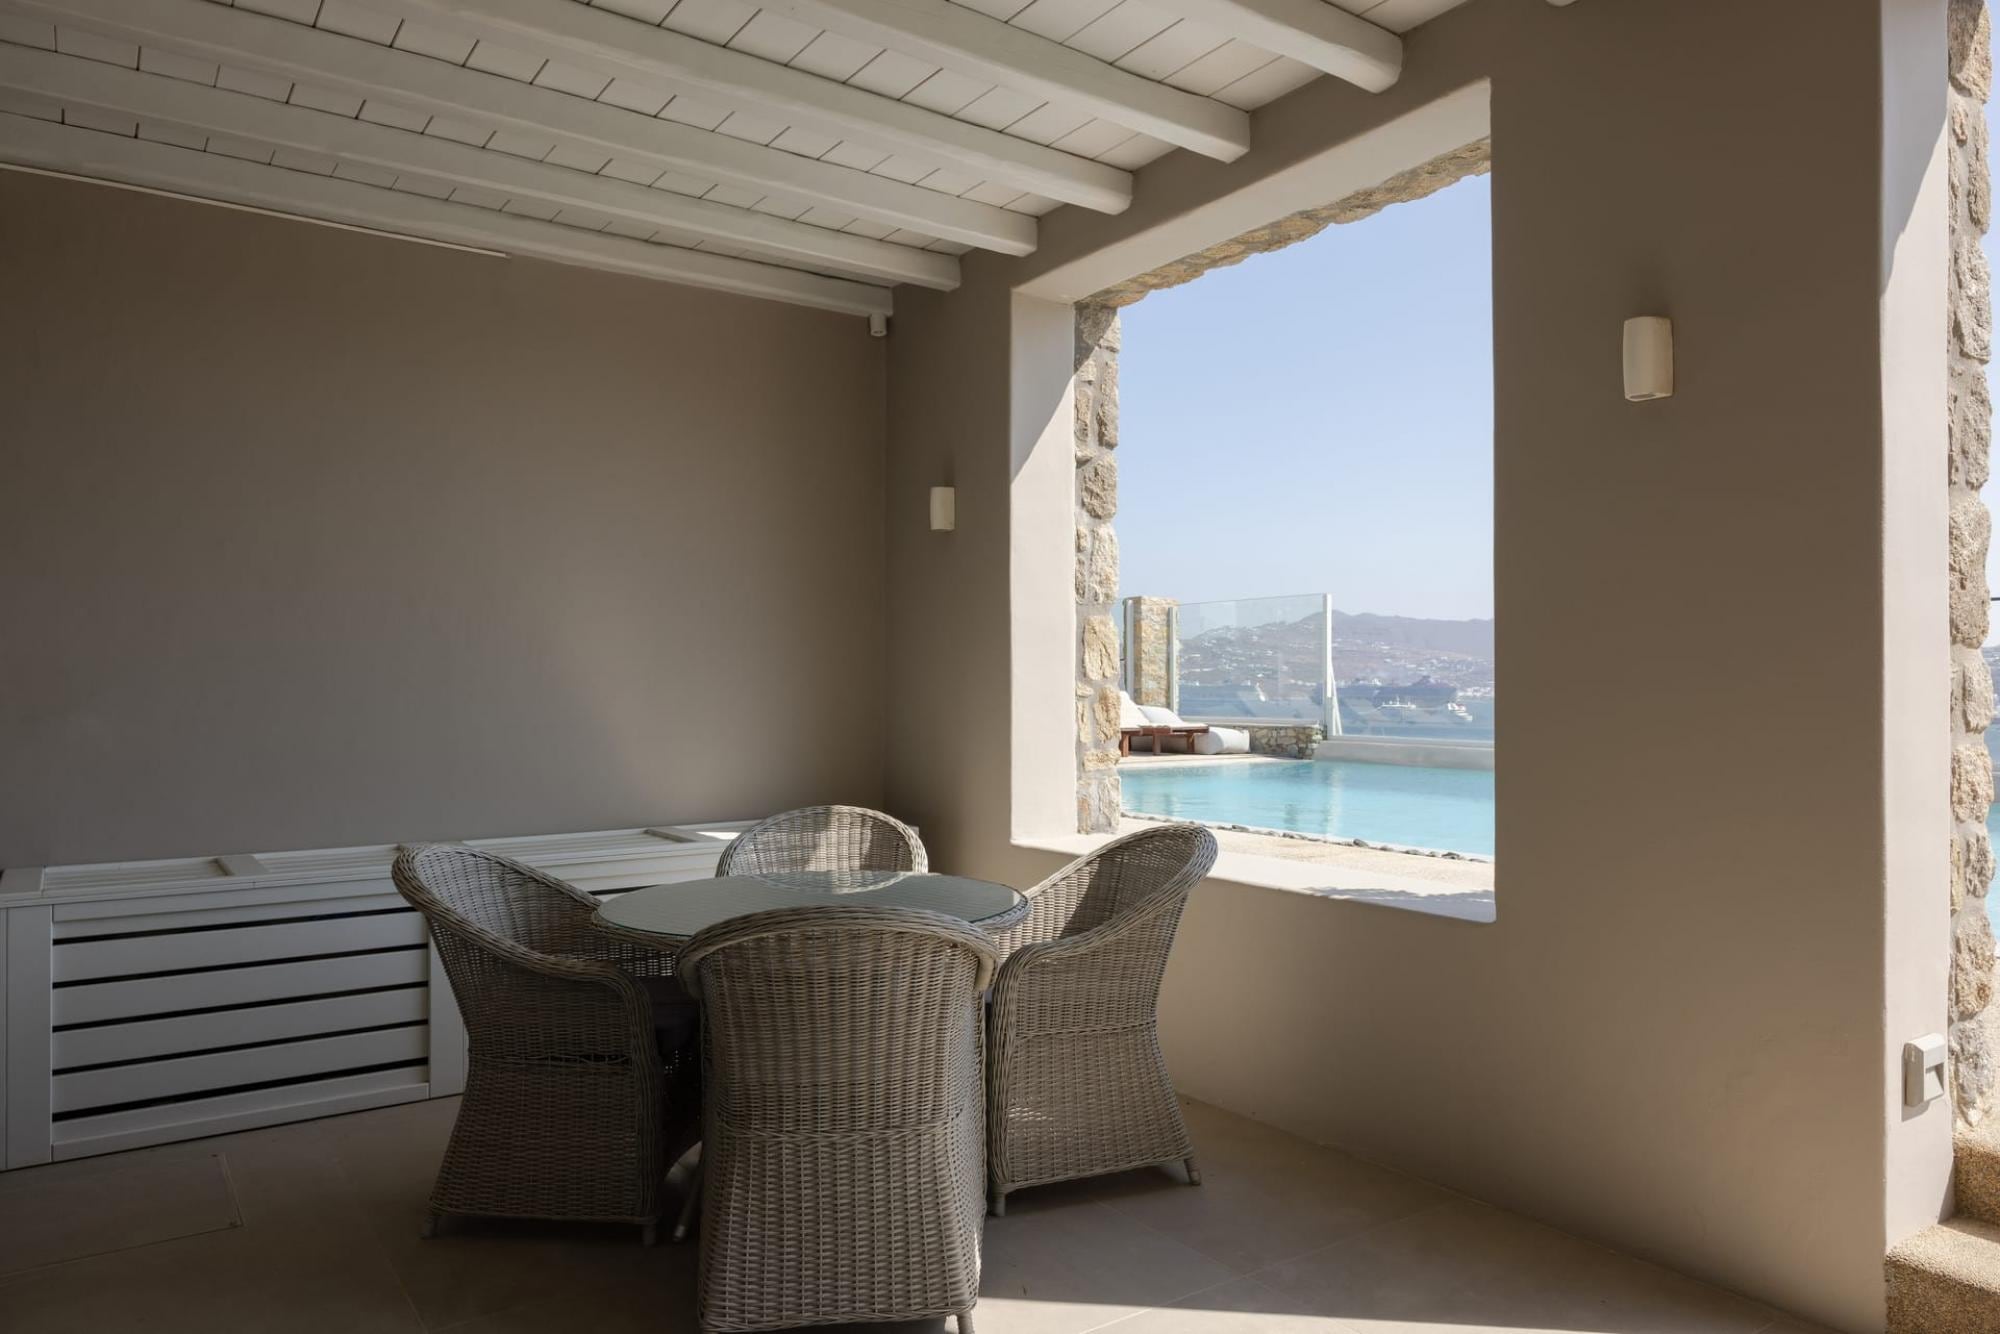 Property Image 1 - Calm Sophisticated 2 Bedroom Luxury Apartment with Breathtaking Views of Harbour of Mykonos and Aegean Sea